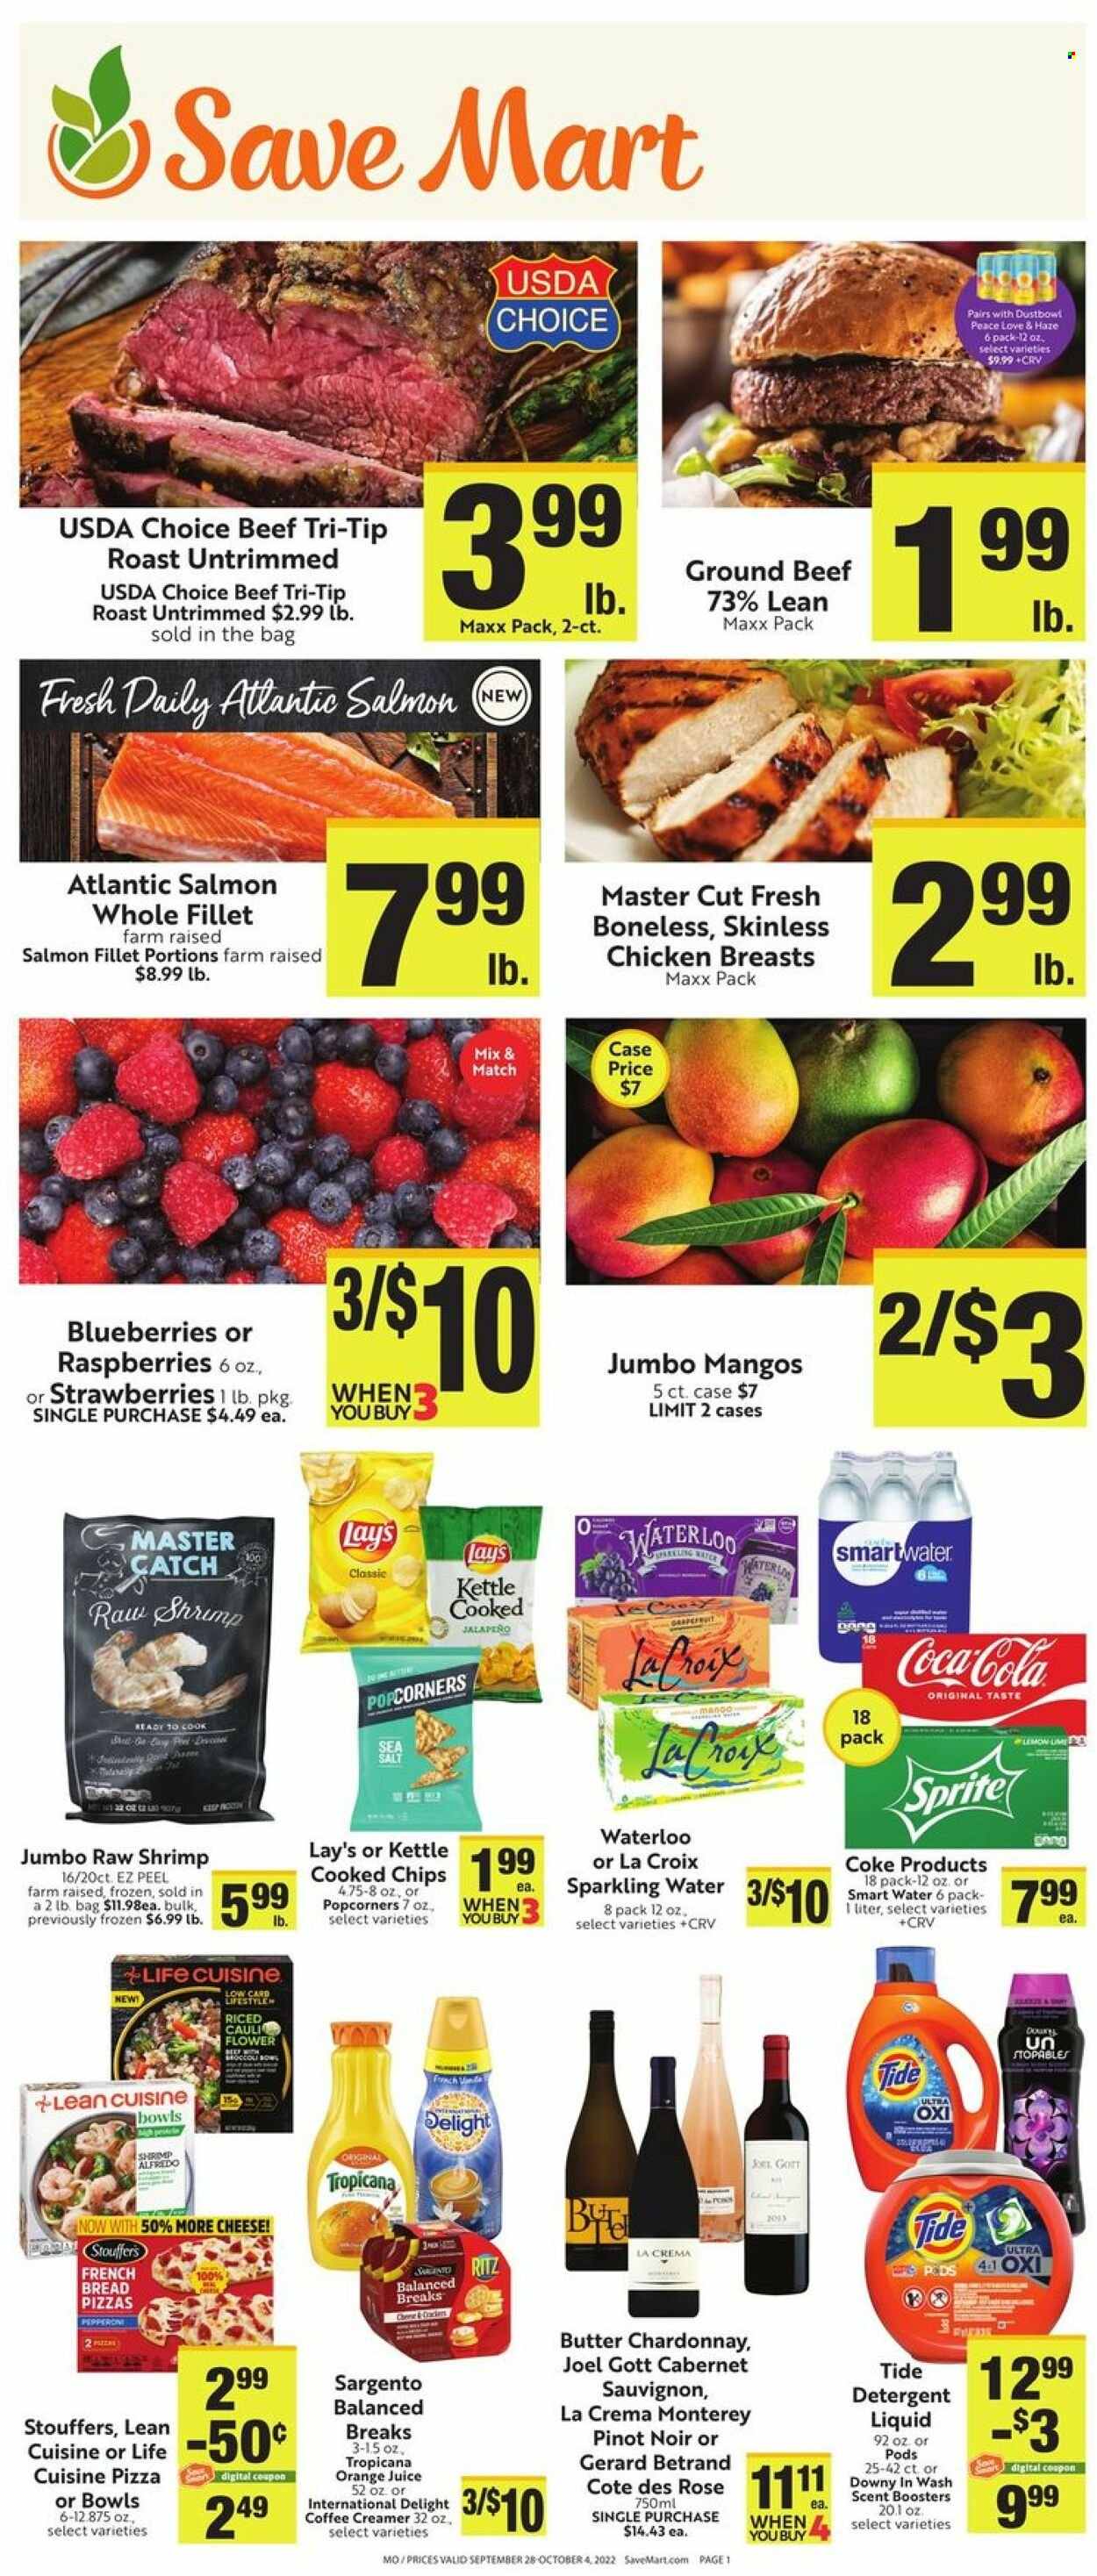 thumbnail - Save Mart Flyer - 09/28/2022 - 10/04/2022 - Sales products - bread, french bread, jalapeño, blueberries, grapefruits, mango, strawberries, chicken breasts, beef meat, ground beef, salmon, salmon fillet, shrimps, pizza, Lean Cuisine, Sargento, butter, creamer, RITZ, Lay’s, popcorn, Coca-Cola, Sprite, orange juice, juice, sparkling water, Smartwater, Cabernet Sauvignon, red wine, white wine, Chardonnay, wine, Pinot Noir, rosé wine, Tide, scent booster. Page 1.